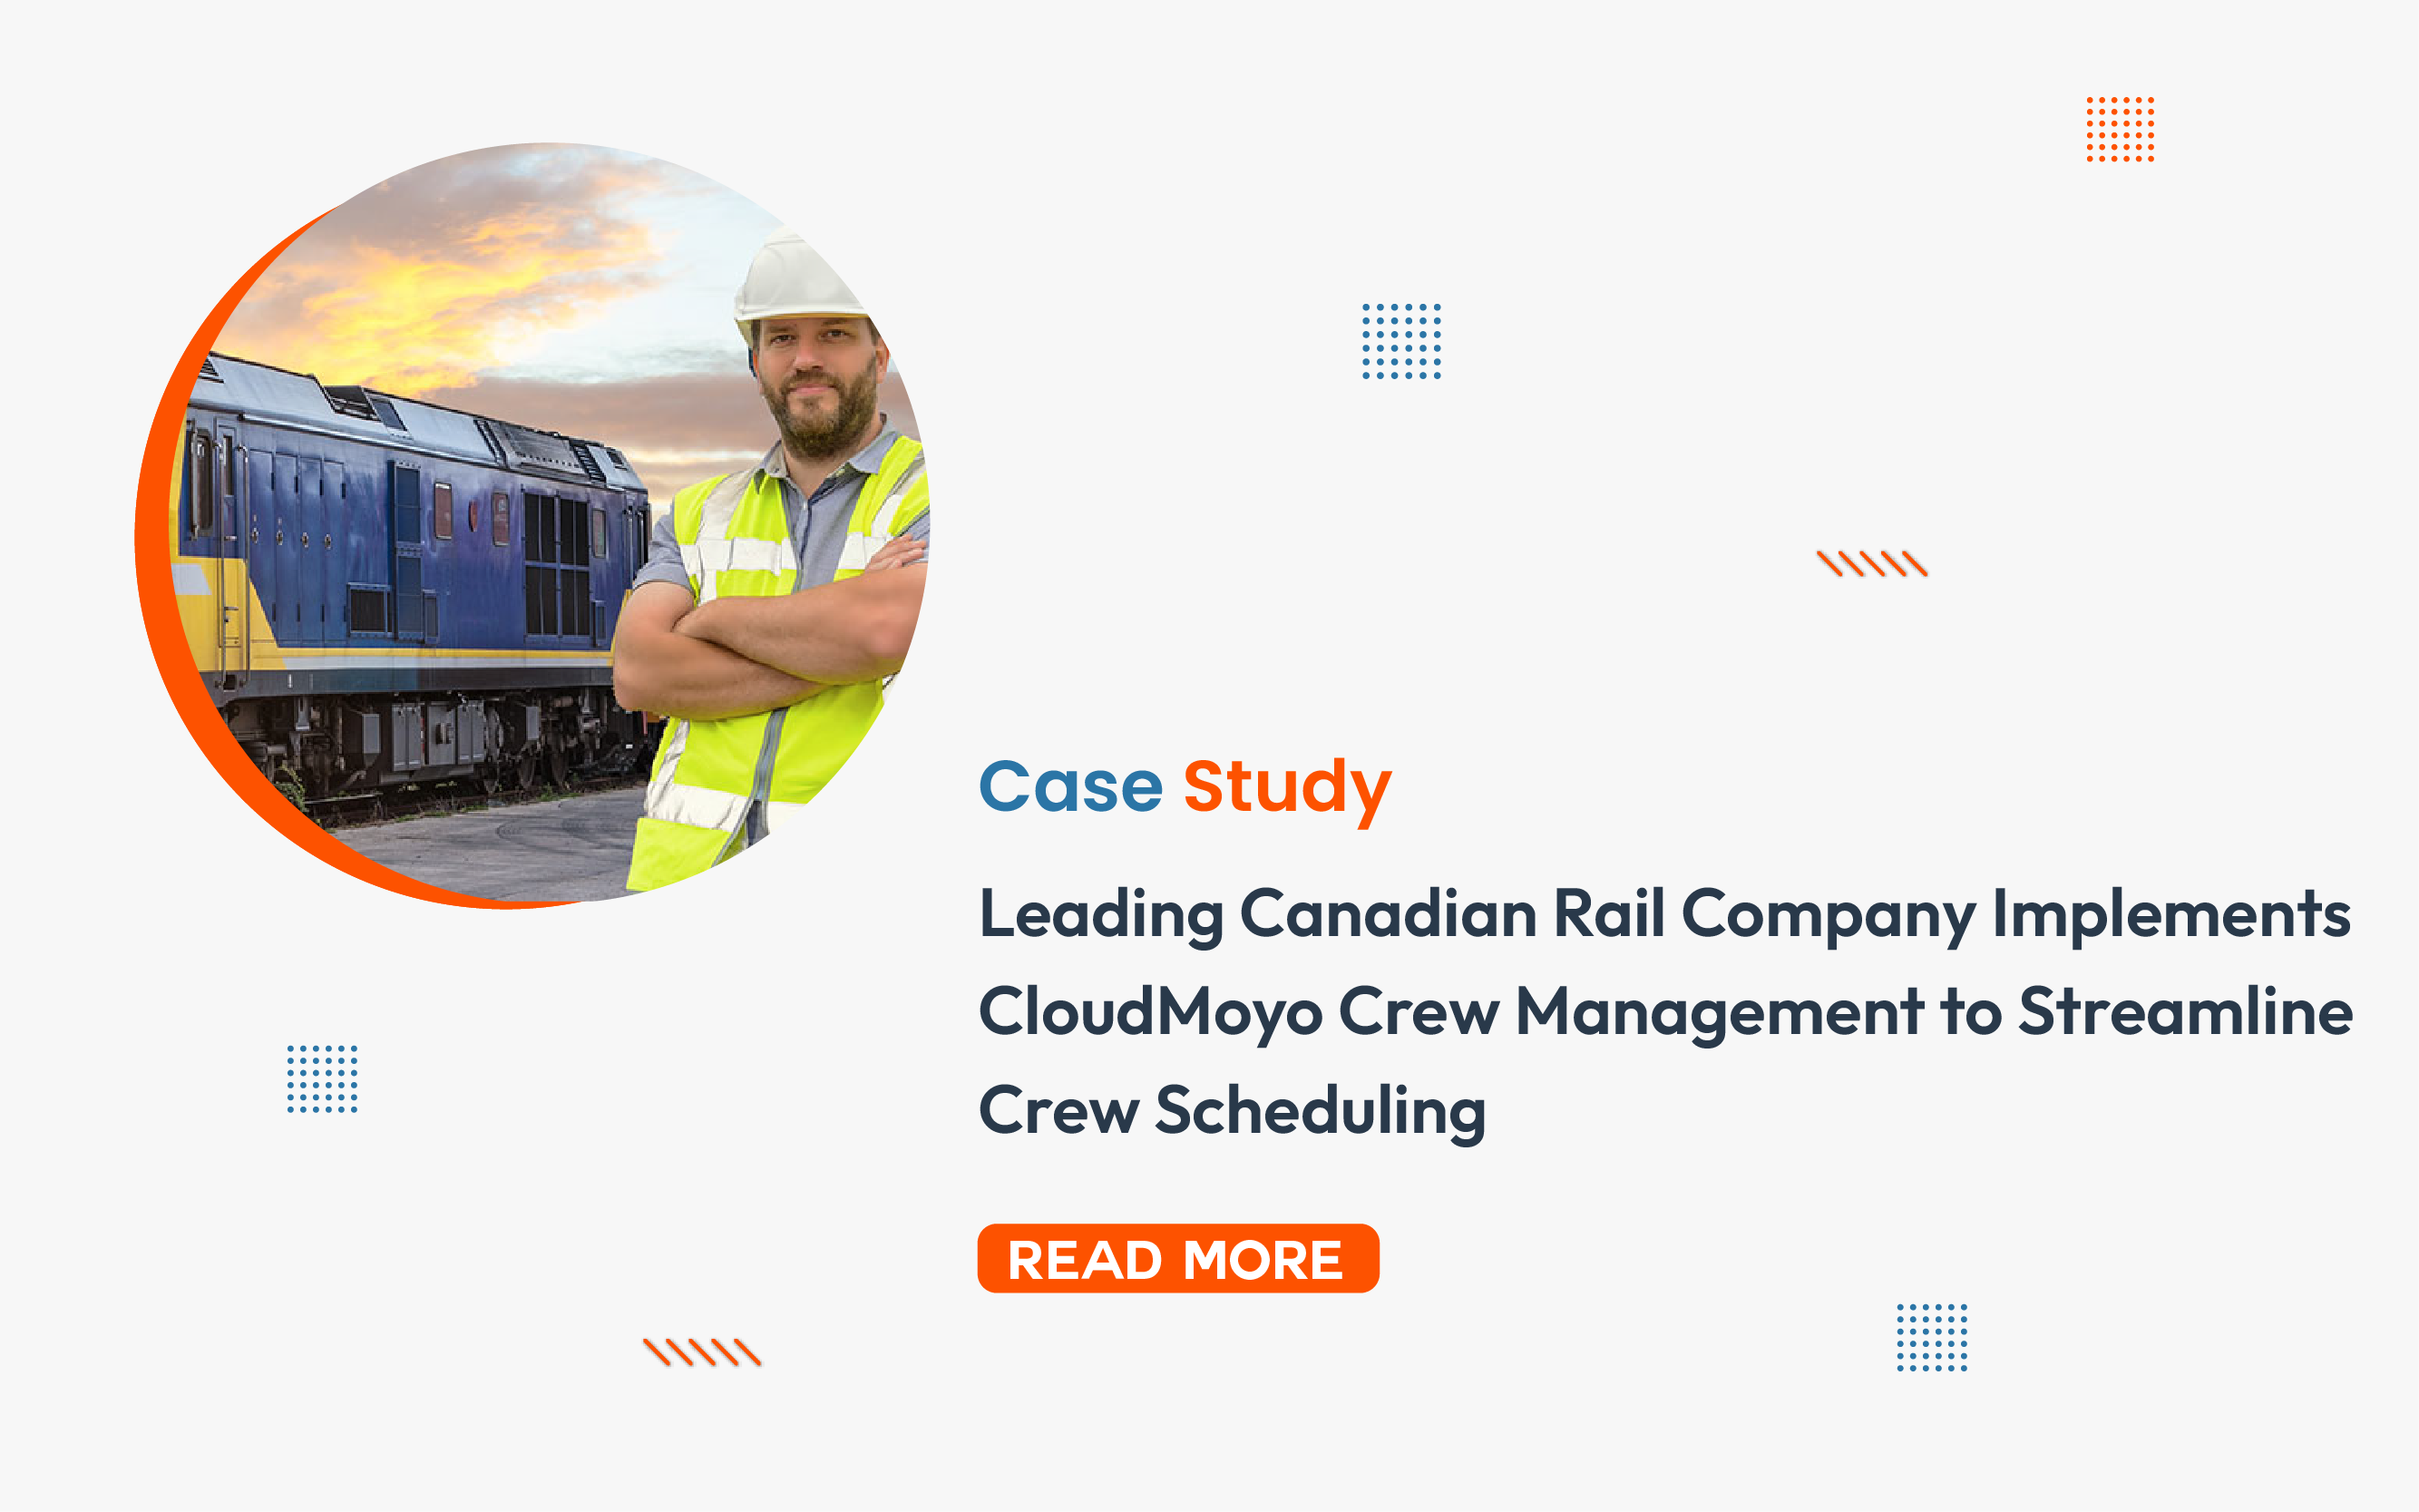 Case Study_Leading Canadian Rail Company Implements CCM